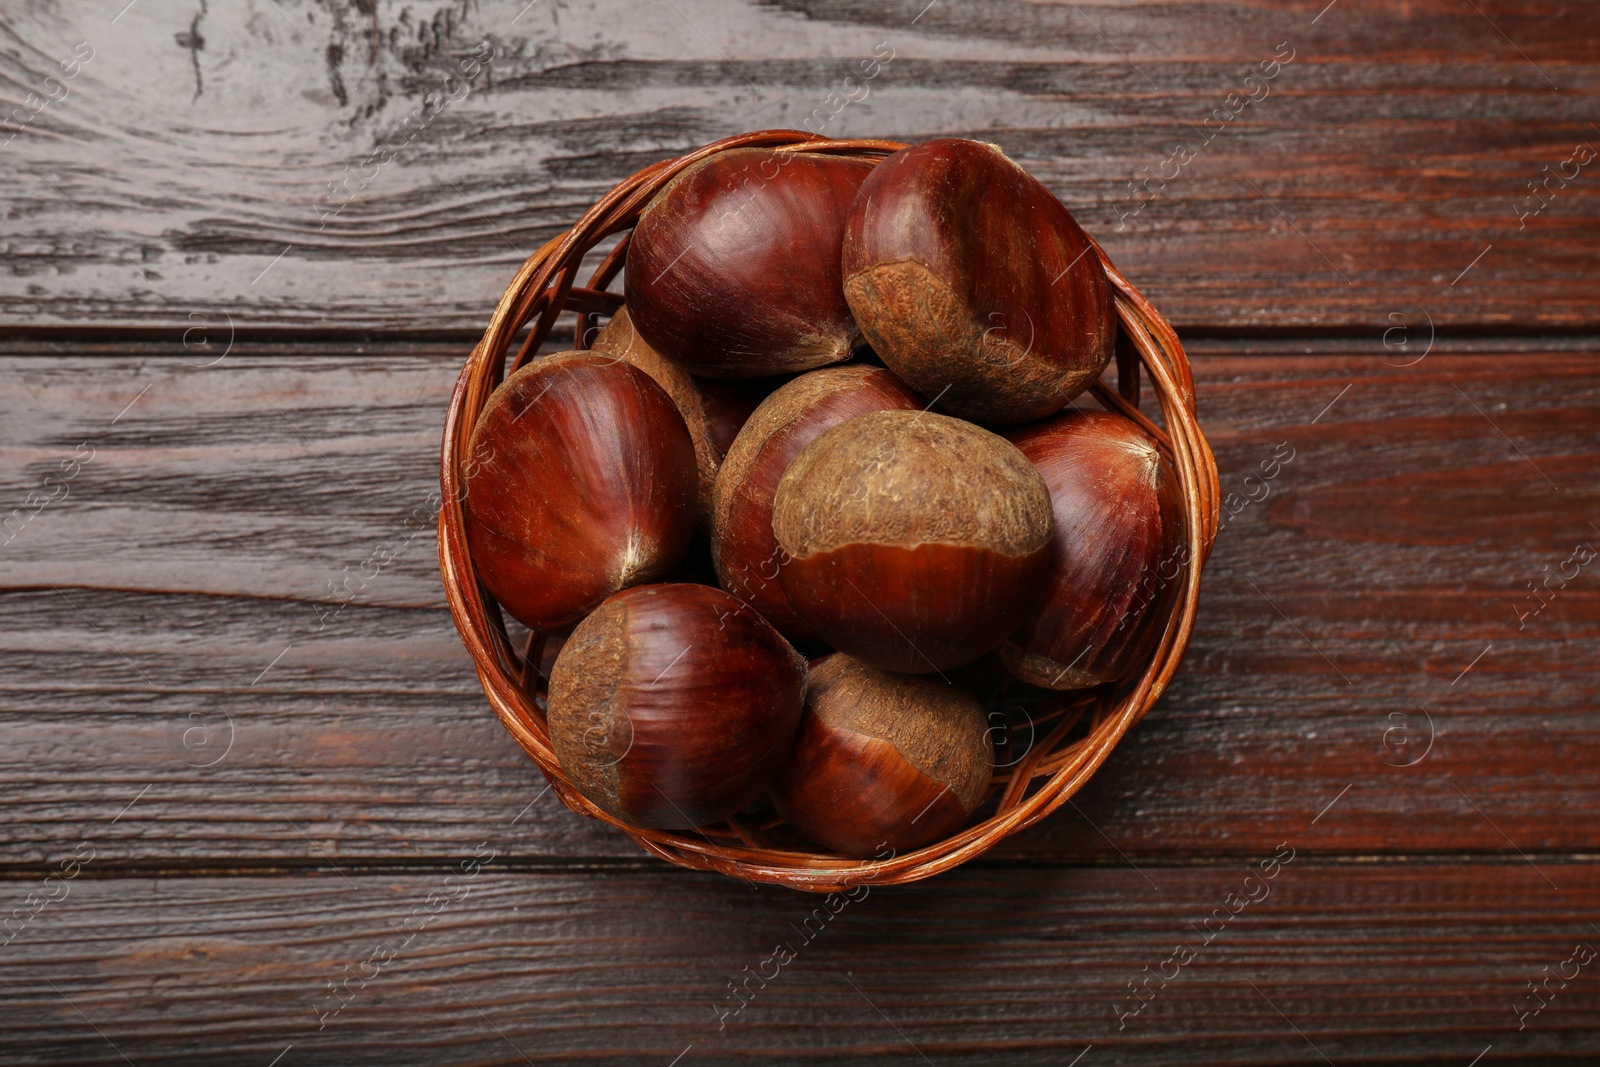 Photo of Sweet fresh edible chestnuts in wicker bowl on wooden table, top view